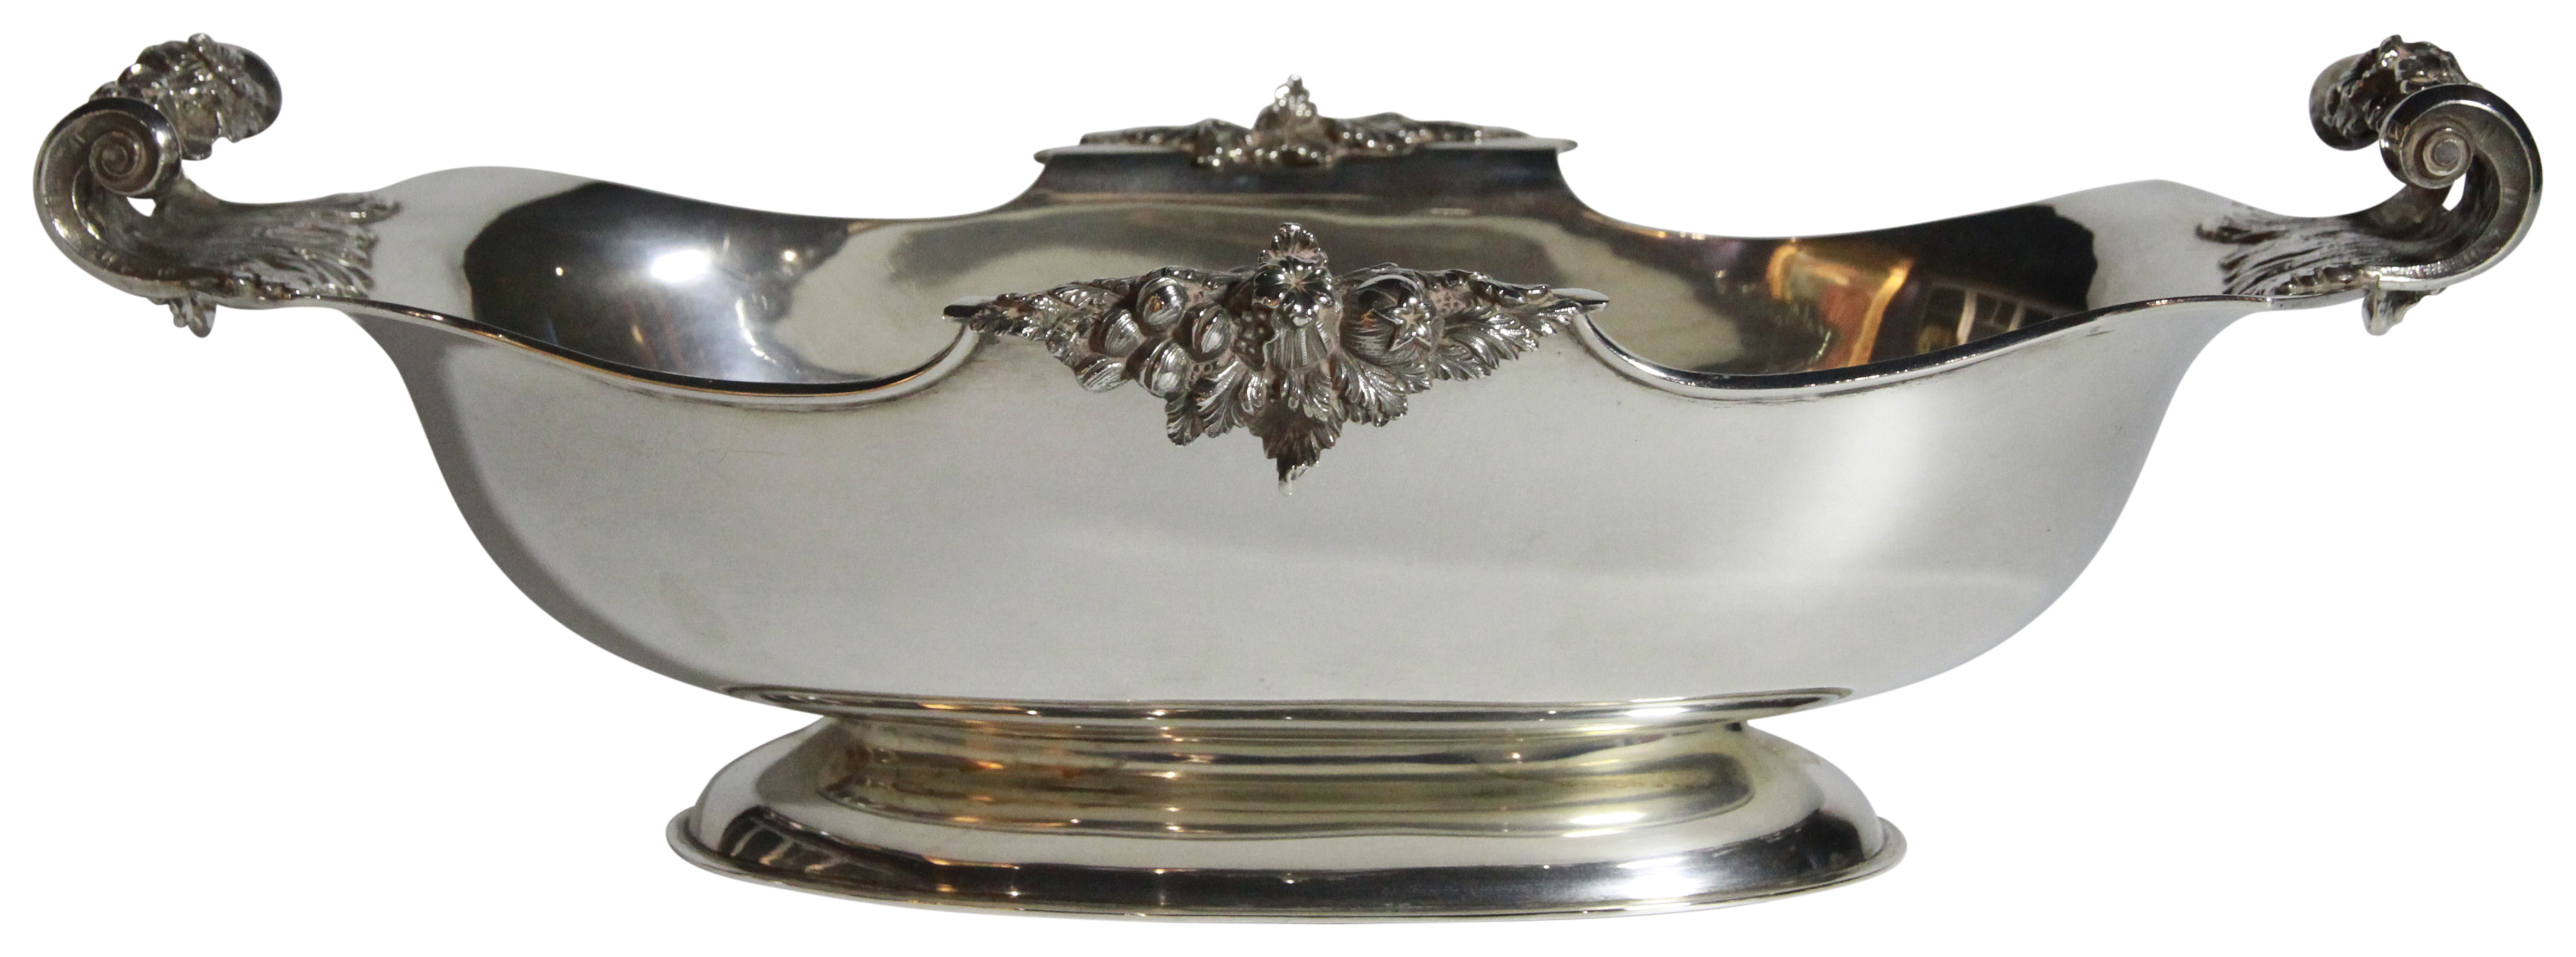 An Italian silver jardinière with floral scrolled handles. Stamped 800, (H: 14cm, L: 40cm)(1,285